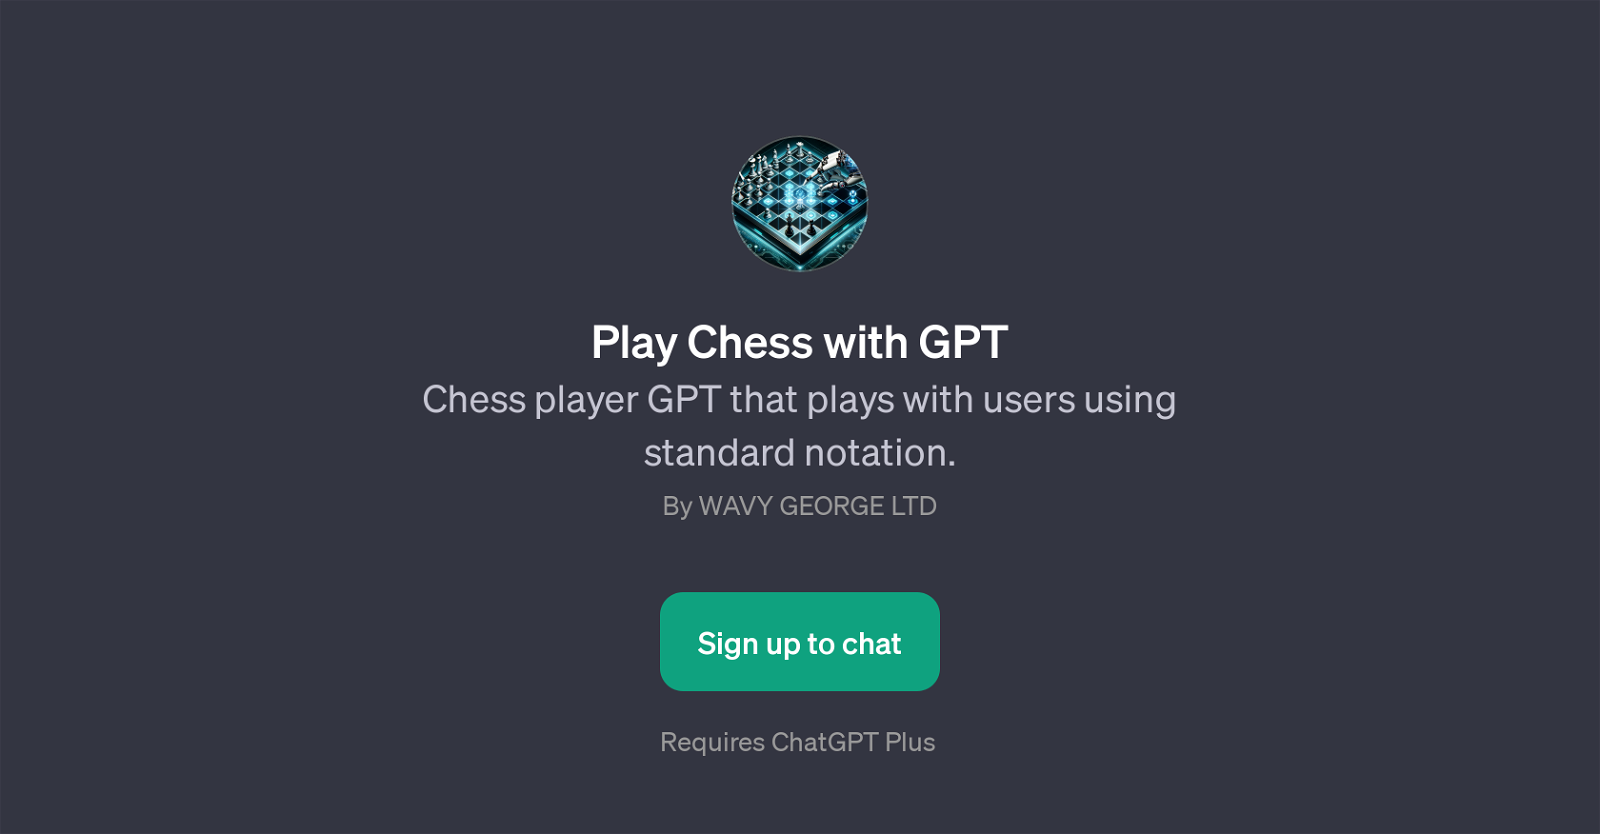 Play Chess with GPT website